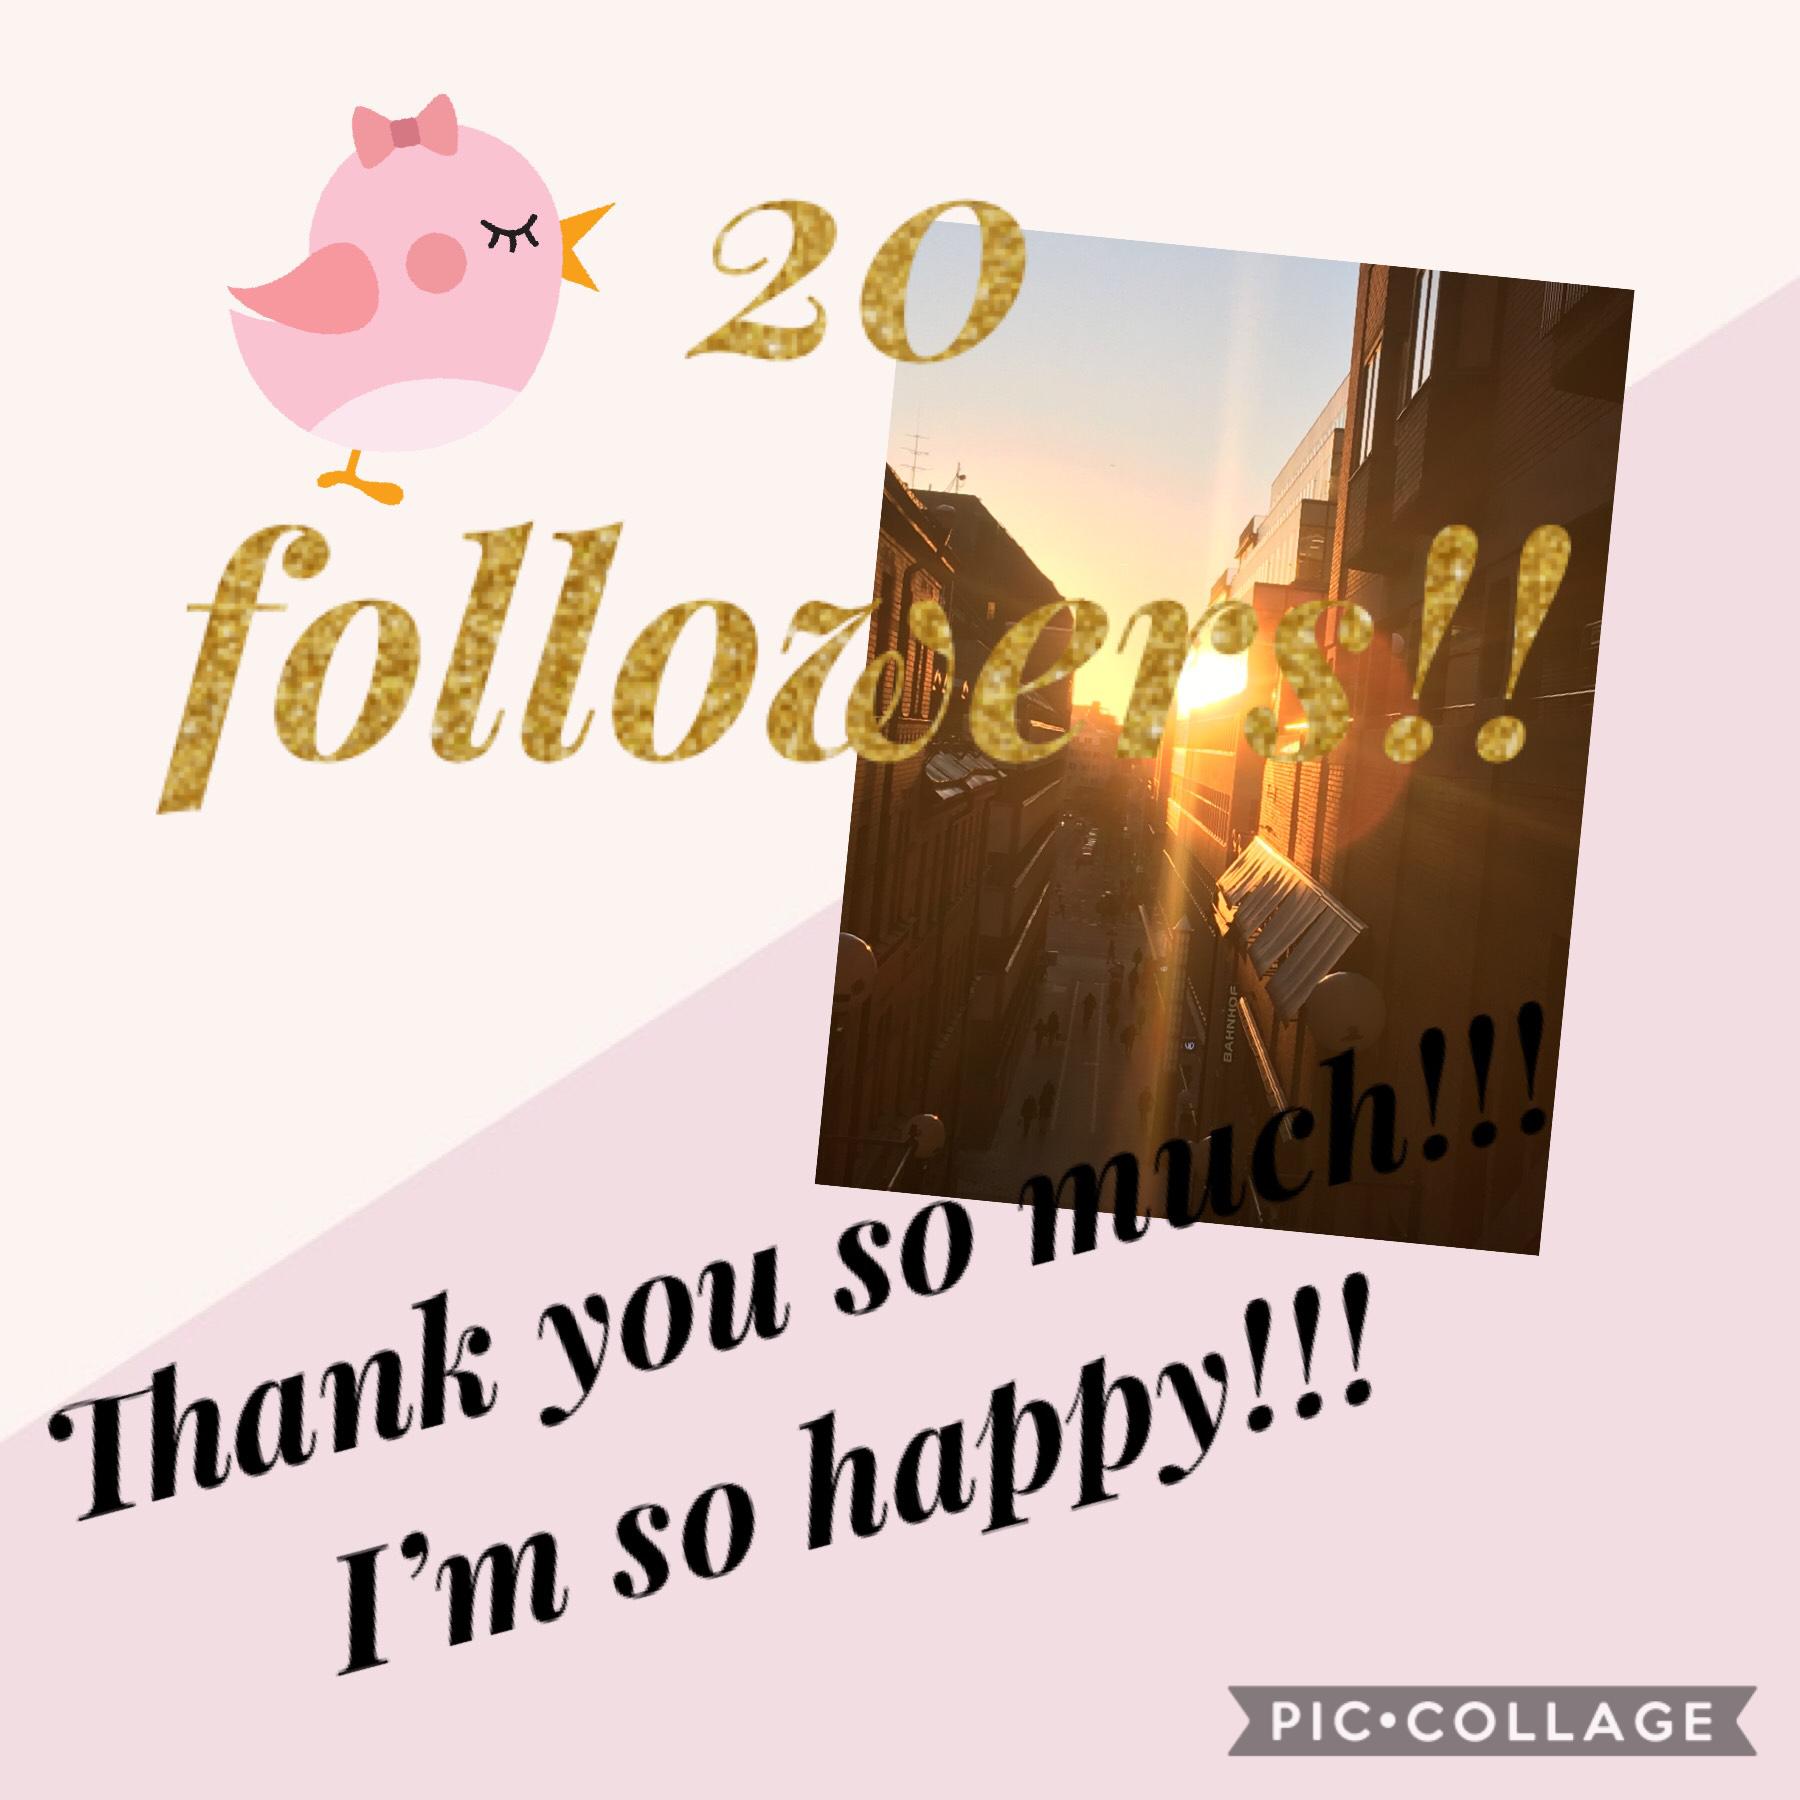 20 FOLLOWERS  (click)
❤️❤️❤️❤️❤️
Thank you so so so much!!
I’m so happy and i love you all!!!
❤️❤️❤️❤️❤️
Sorry, i’m late with This collage!!
So now I have 23 followers!!!
❤️❤️❤️❤️❤️
(Like,share,comment and Follow me!)